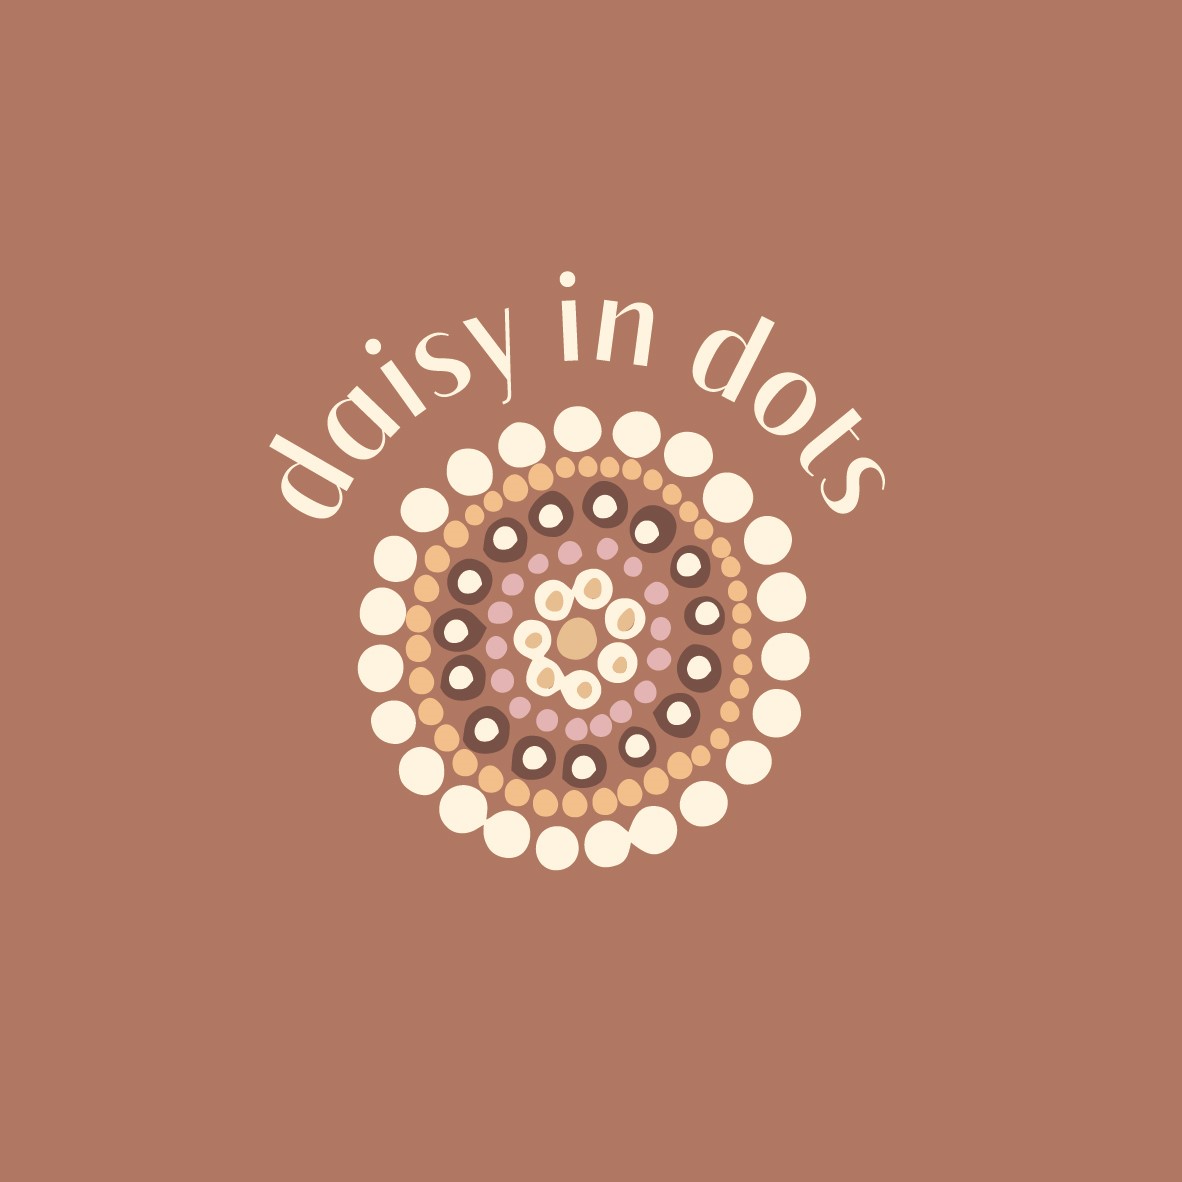 Australian, Typography, Indigenous, Fashion, 4 The Luv by Patricia Mendes, DG Designs, Daisy in Dots Artworks